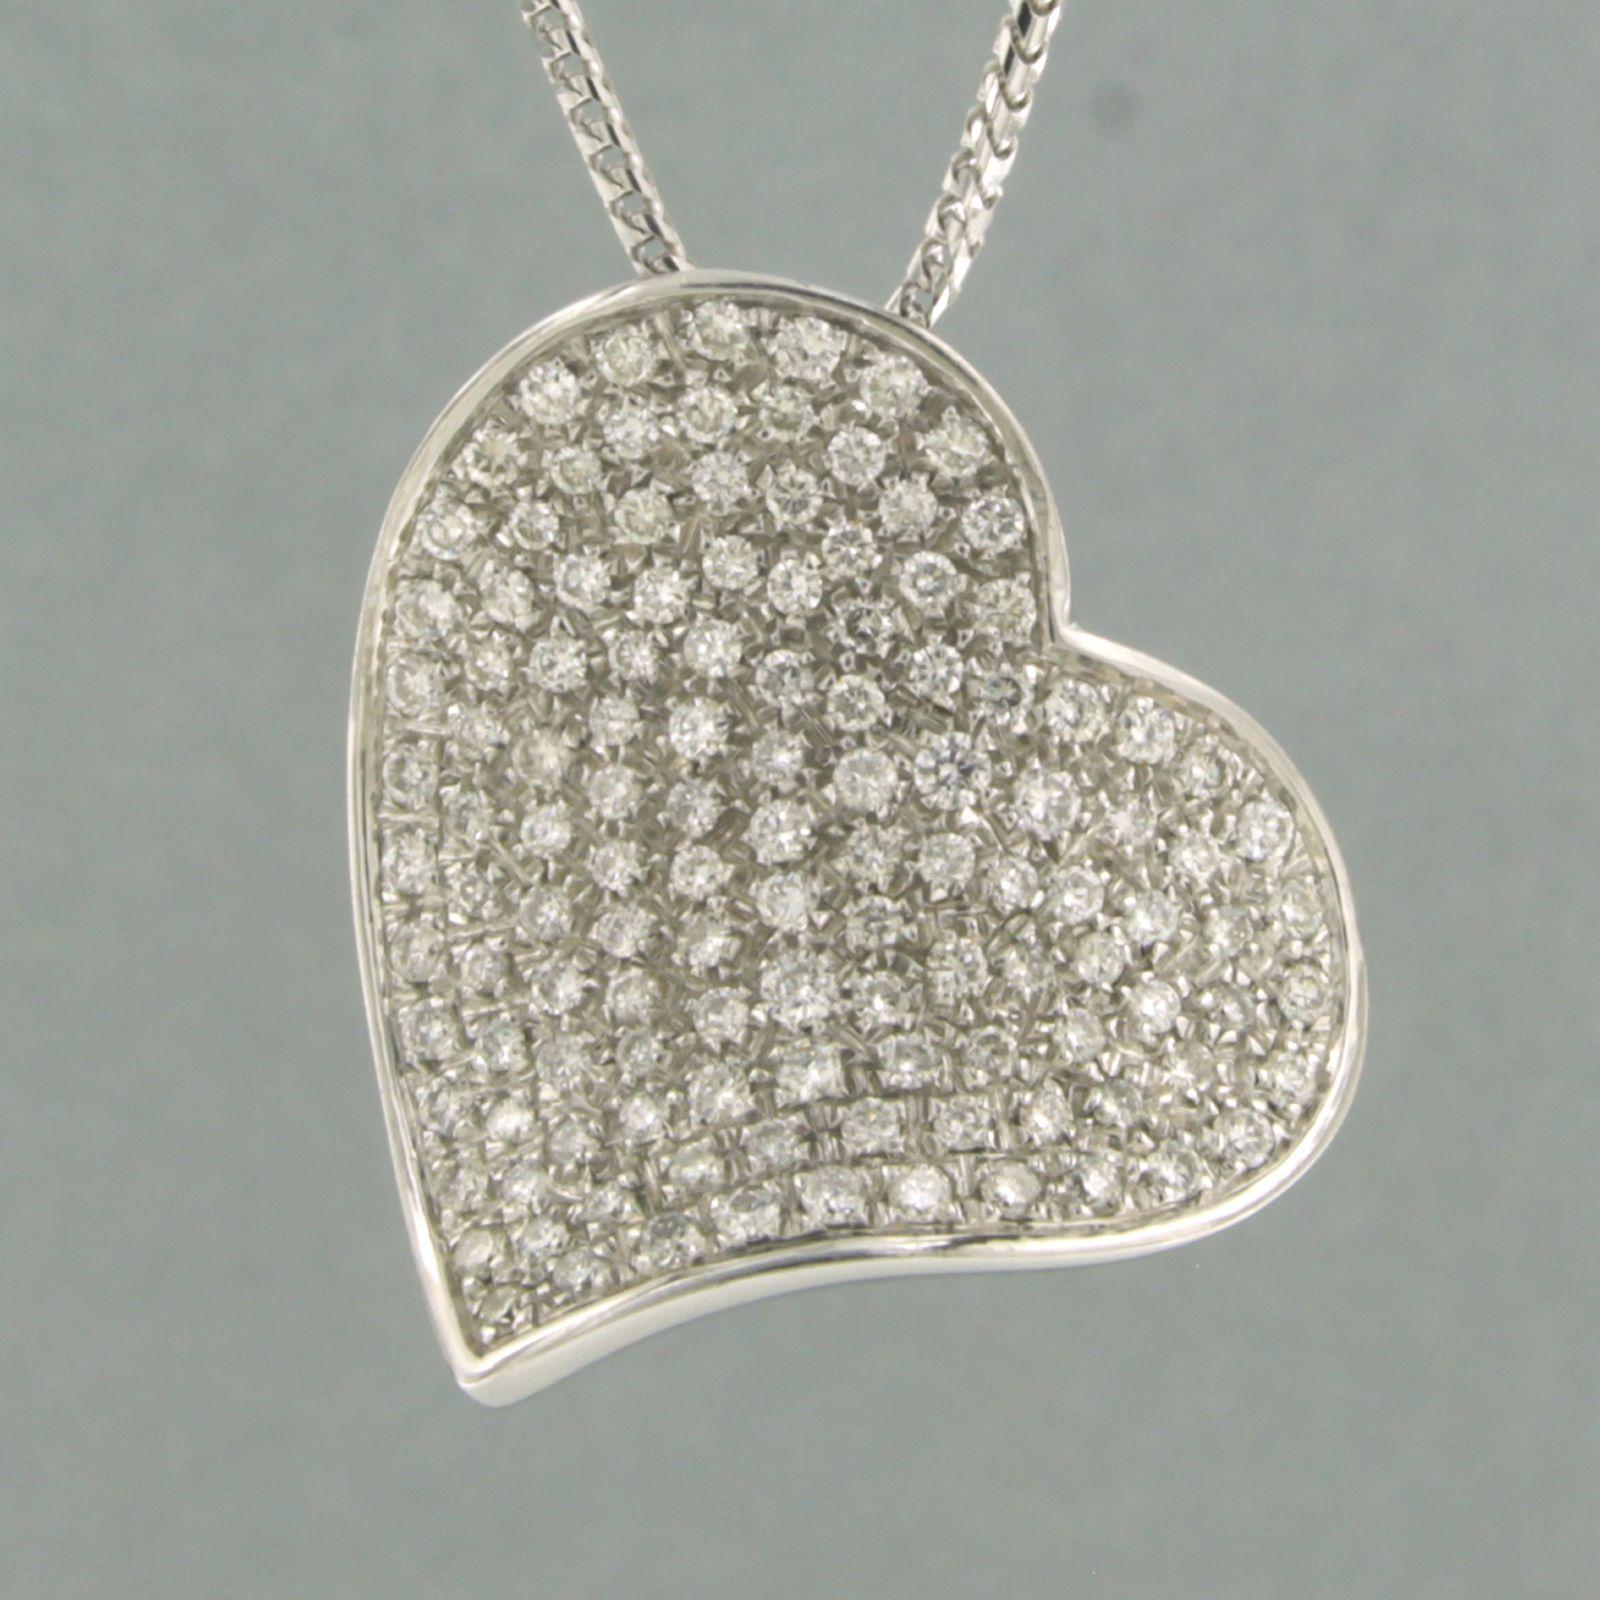 18k white gold necklace with a pendant in the shape of a heart set with brilliant cut diamonds. 1.50ct - H/I - VS/SI - 50 cm long

detailed description:

the necklace is 50 cm long and 1.2 mm wide

the pendant is 2.5 cm long by 2.5 mm wide

weight